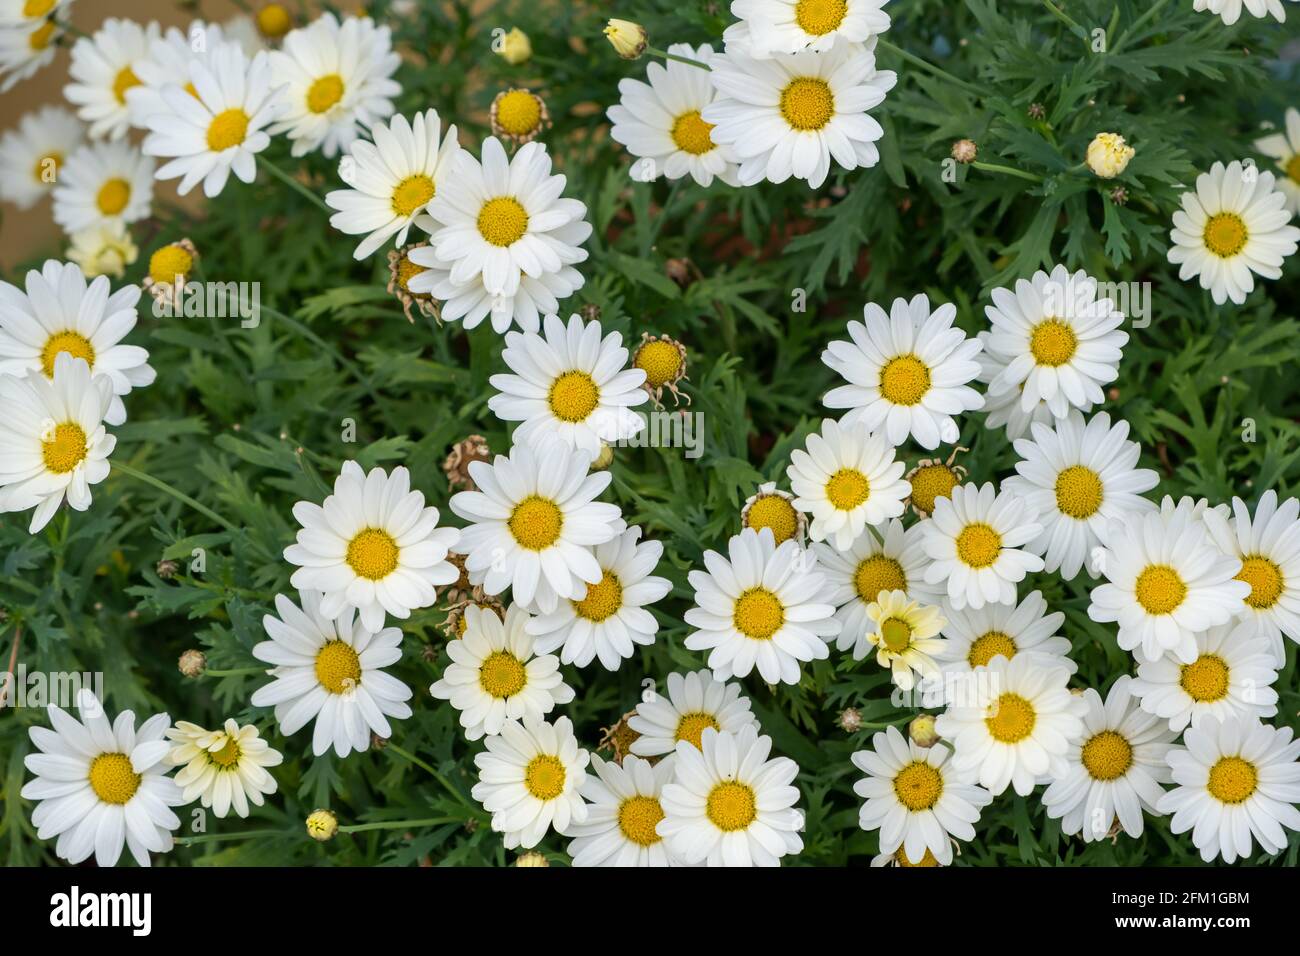 Fresh daisies flowers, bellis perennis, white marguerites with yellow centers at field background, texture, top view. Wild perennial herbaceous plant, Stock Photo